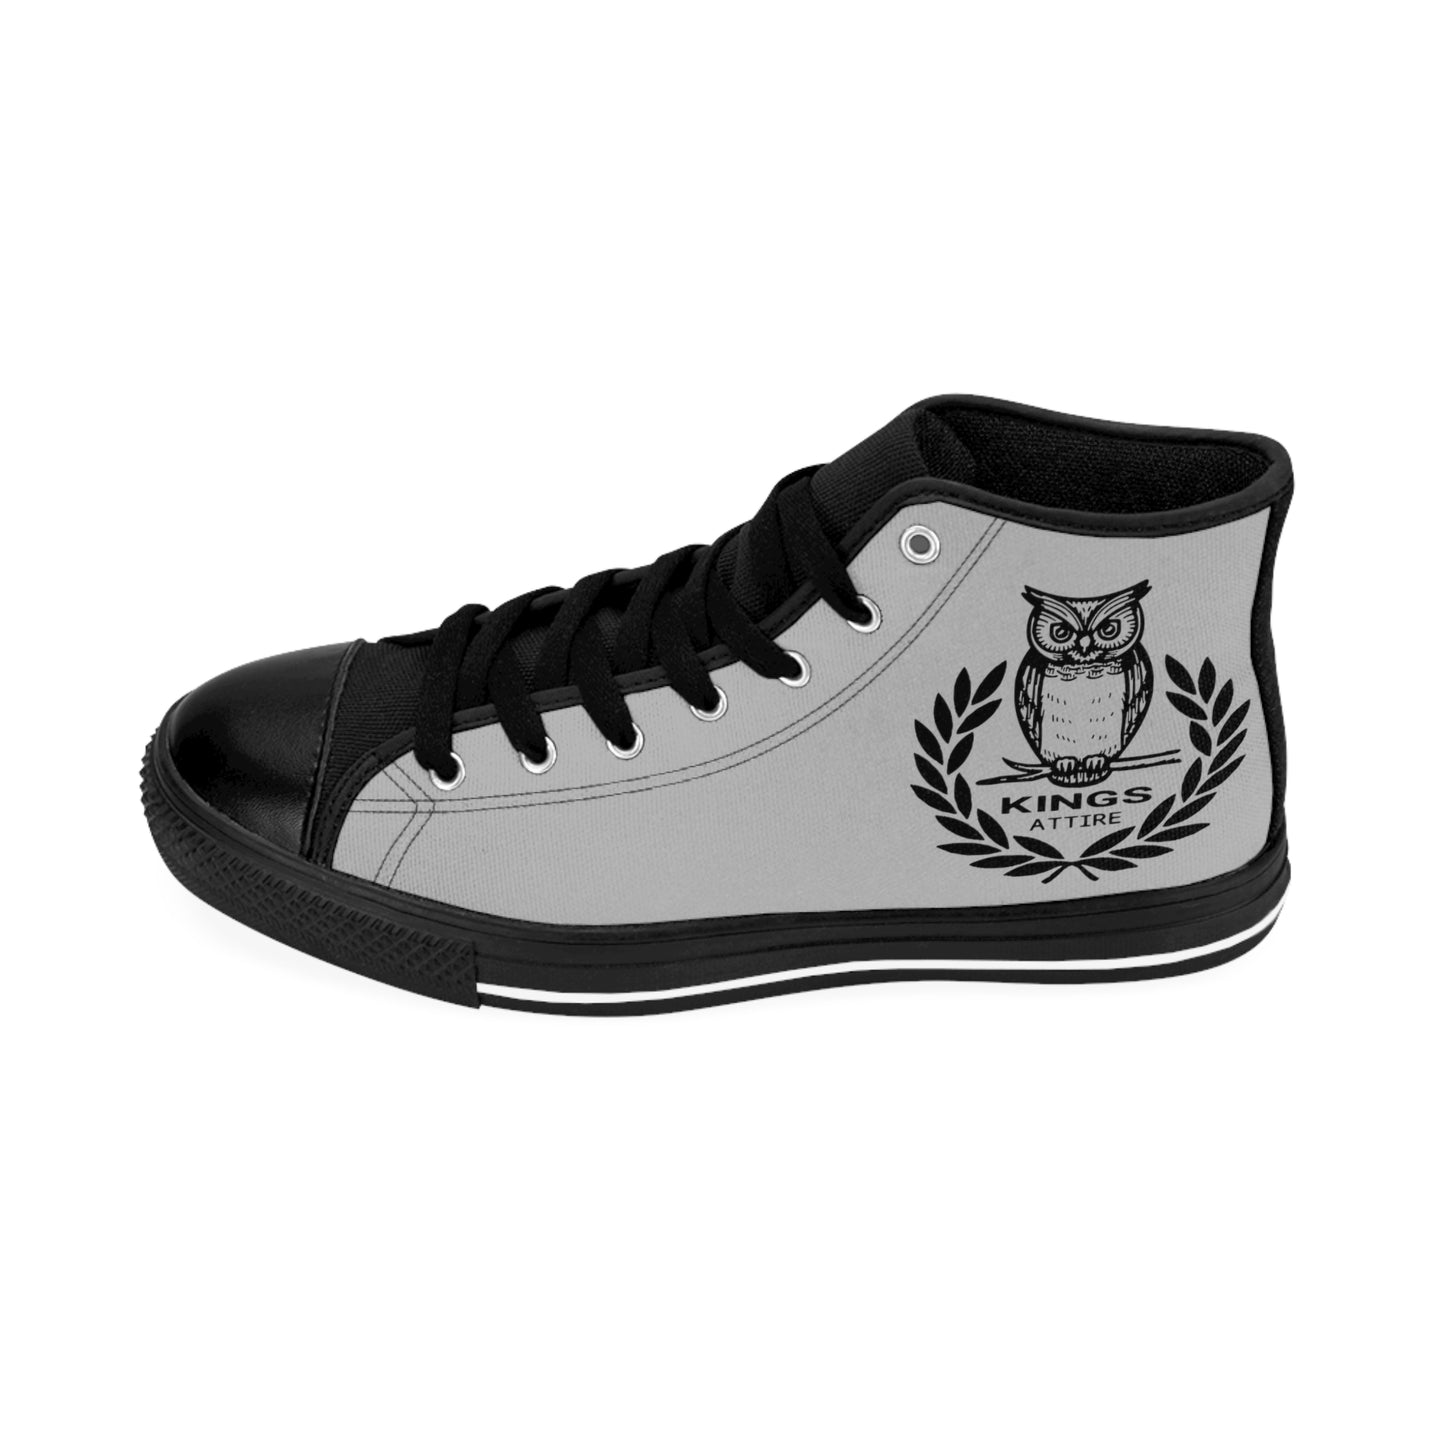 Kings Attire High Top shoes